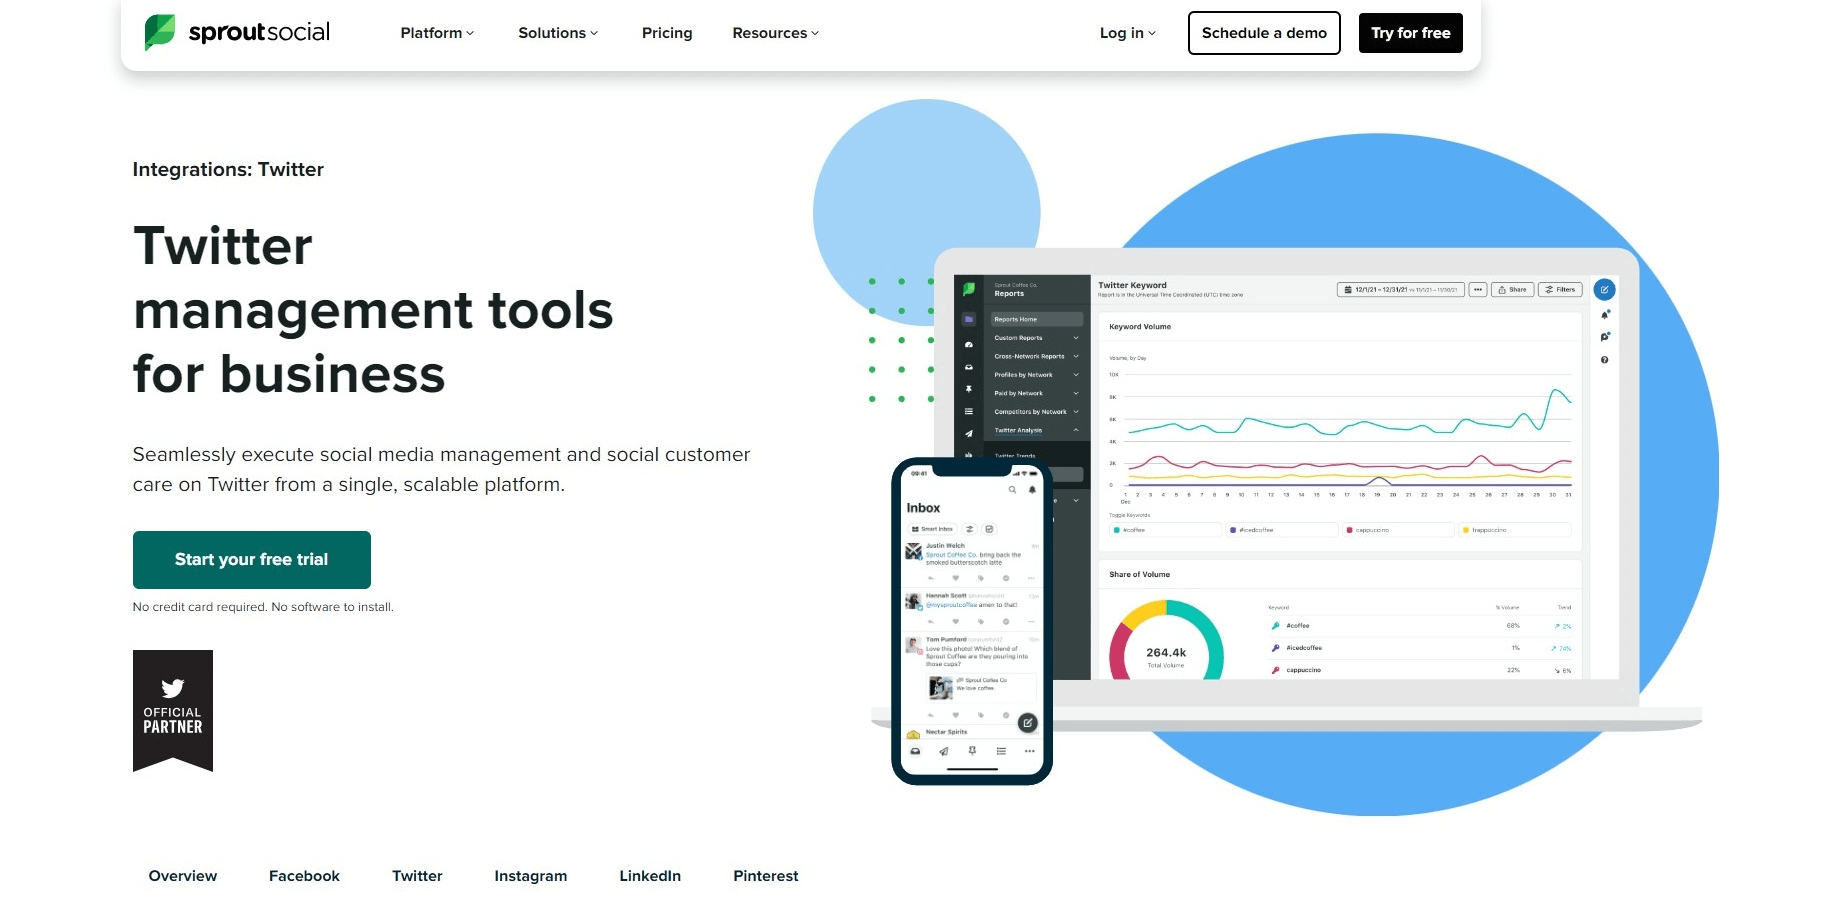 Sprout Social landing page for Twitter management tools for business